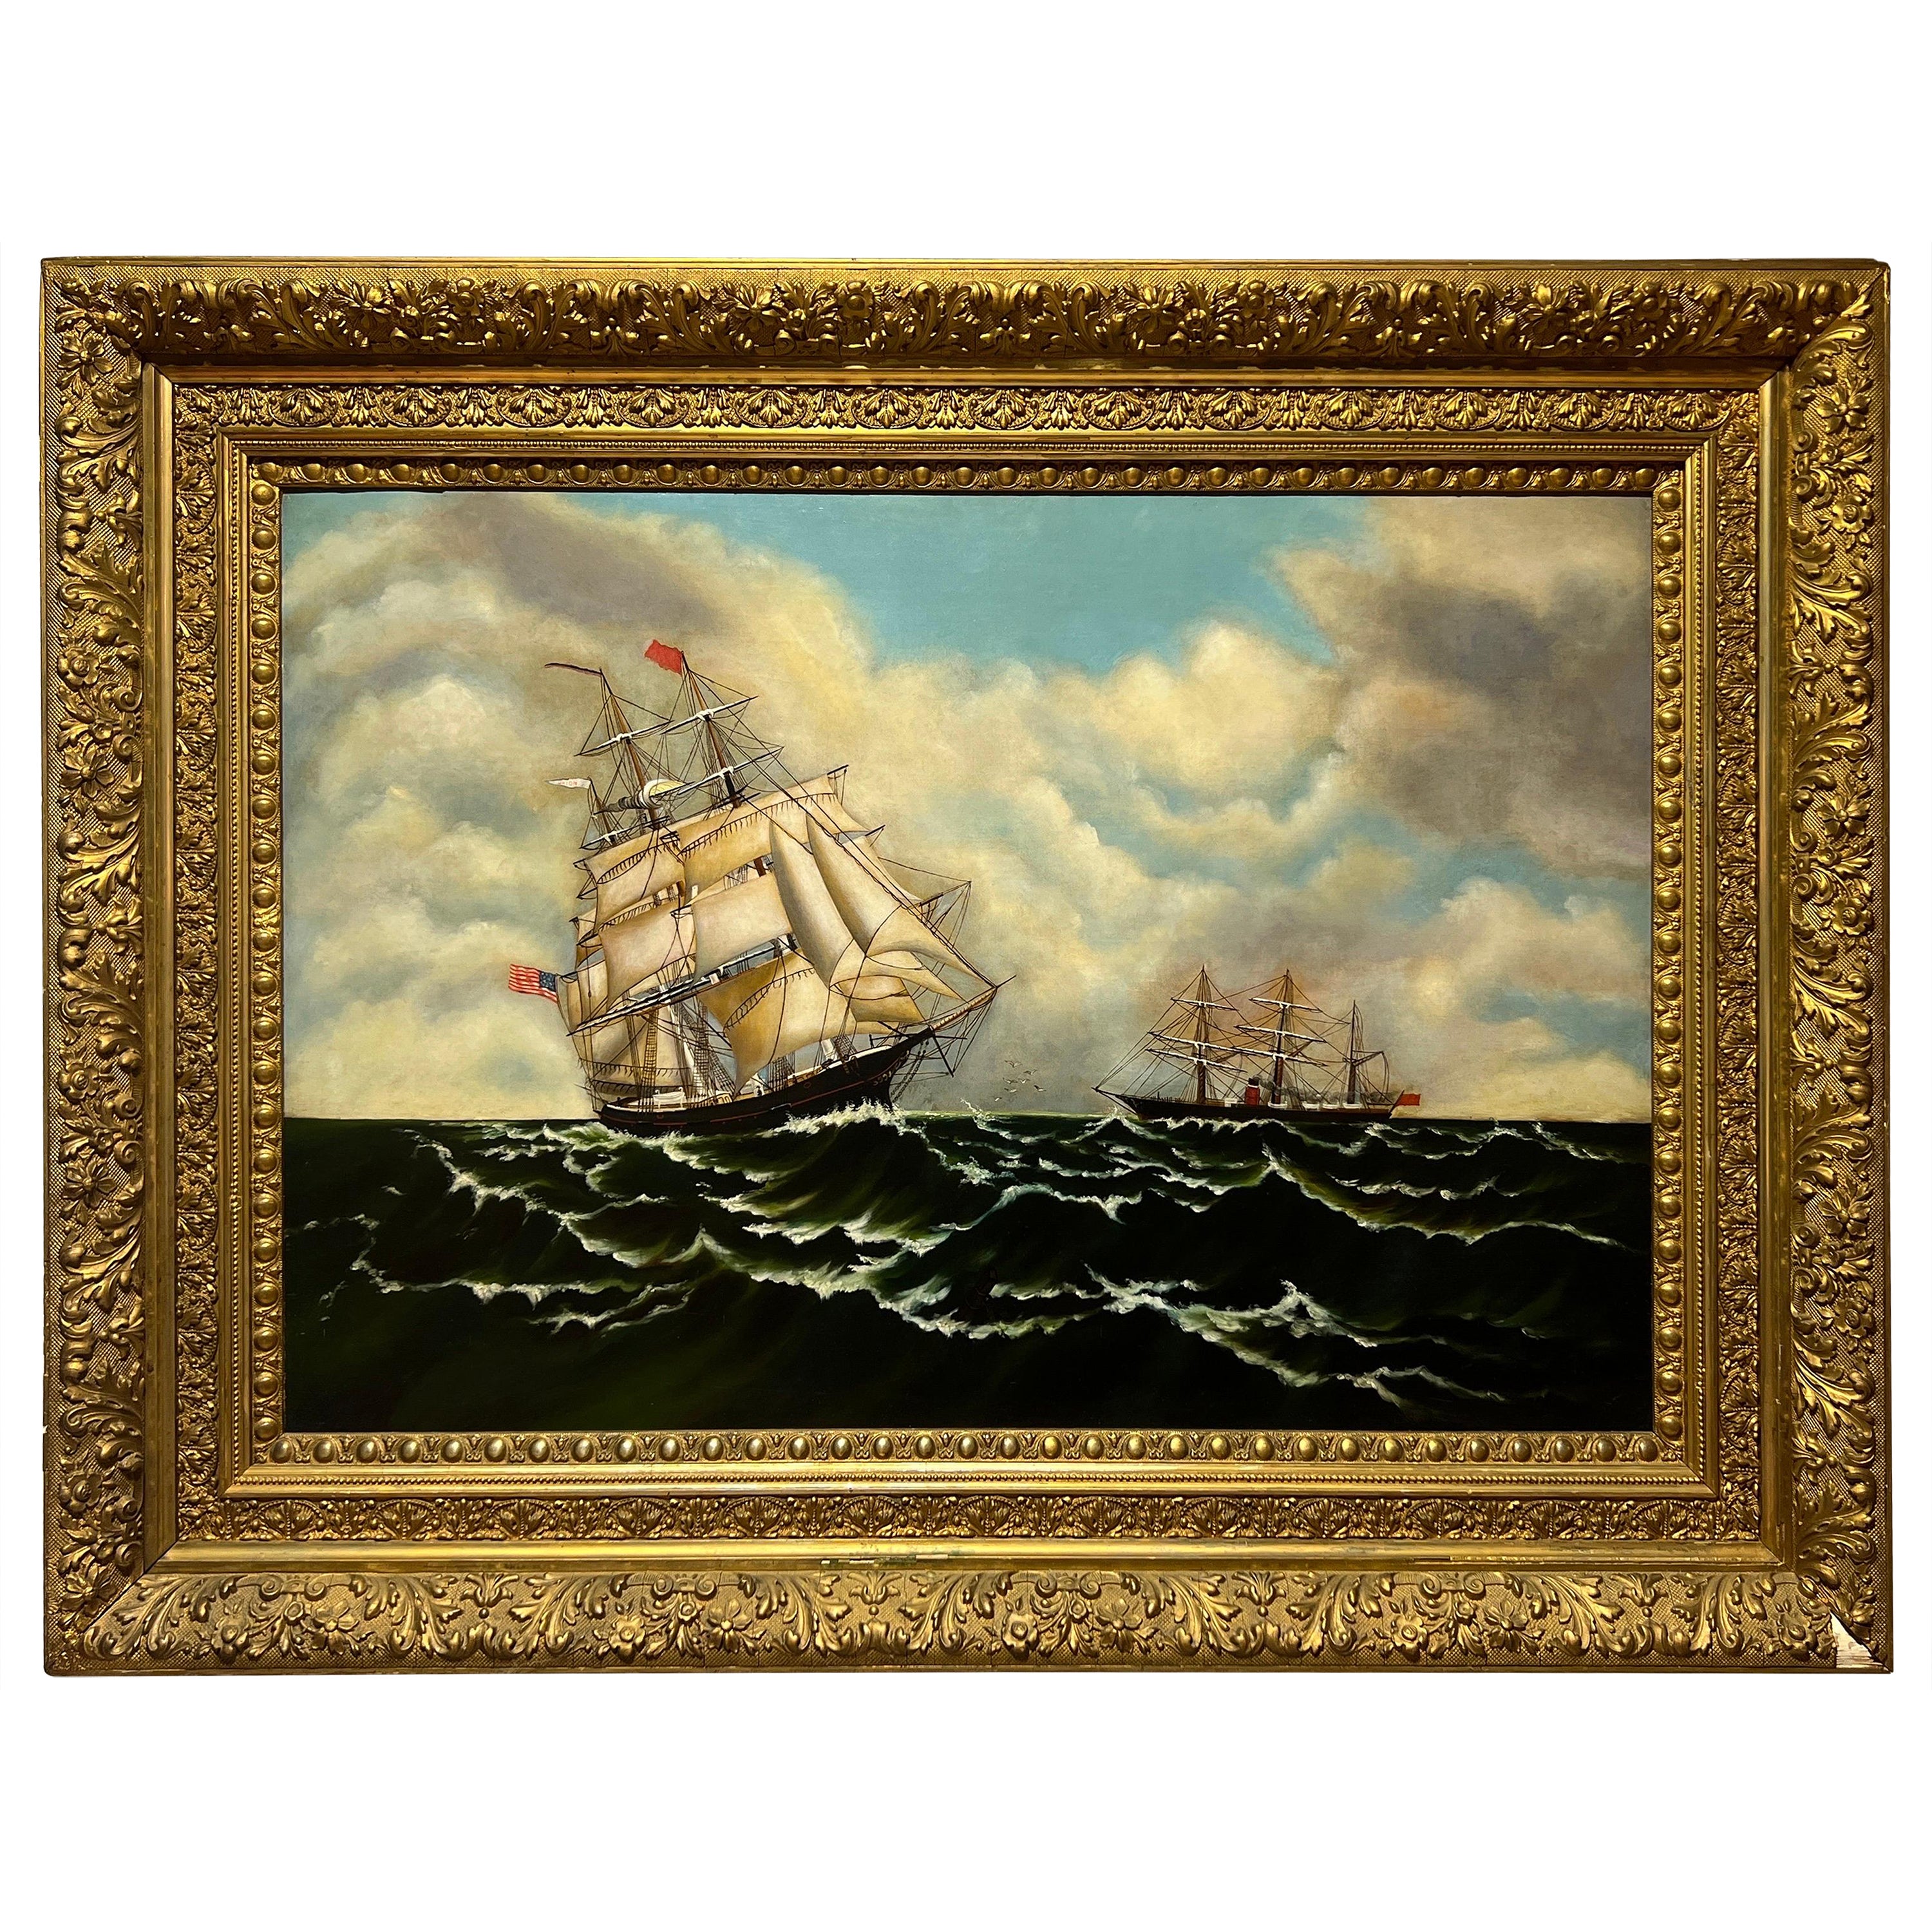 Large Scale Original Union Clipper Ship Oil On Canvas In Ornate Antique Frame